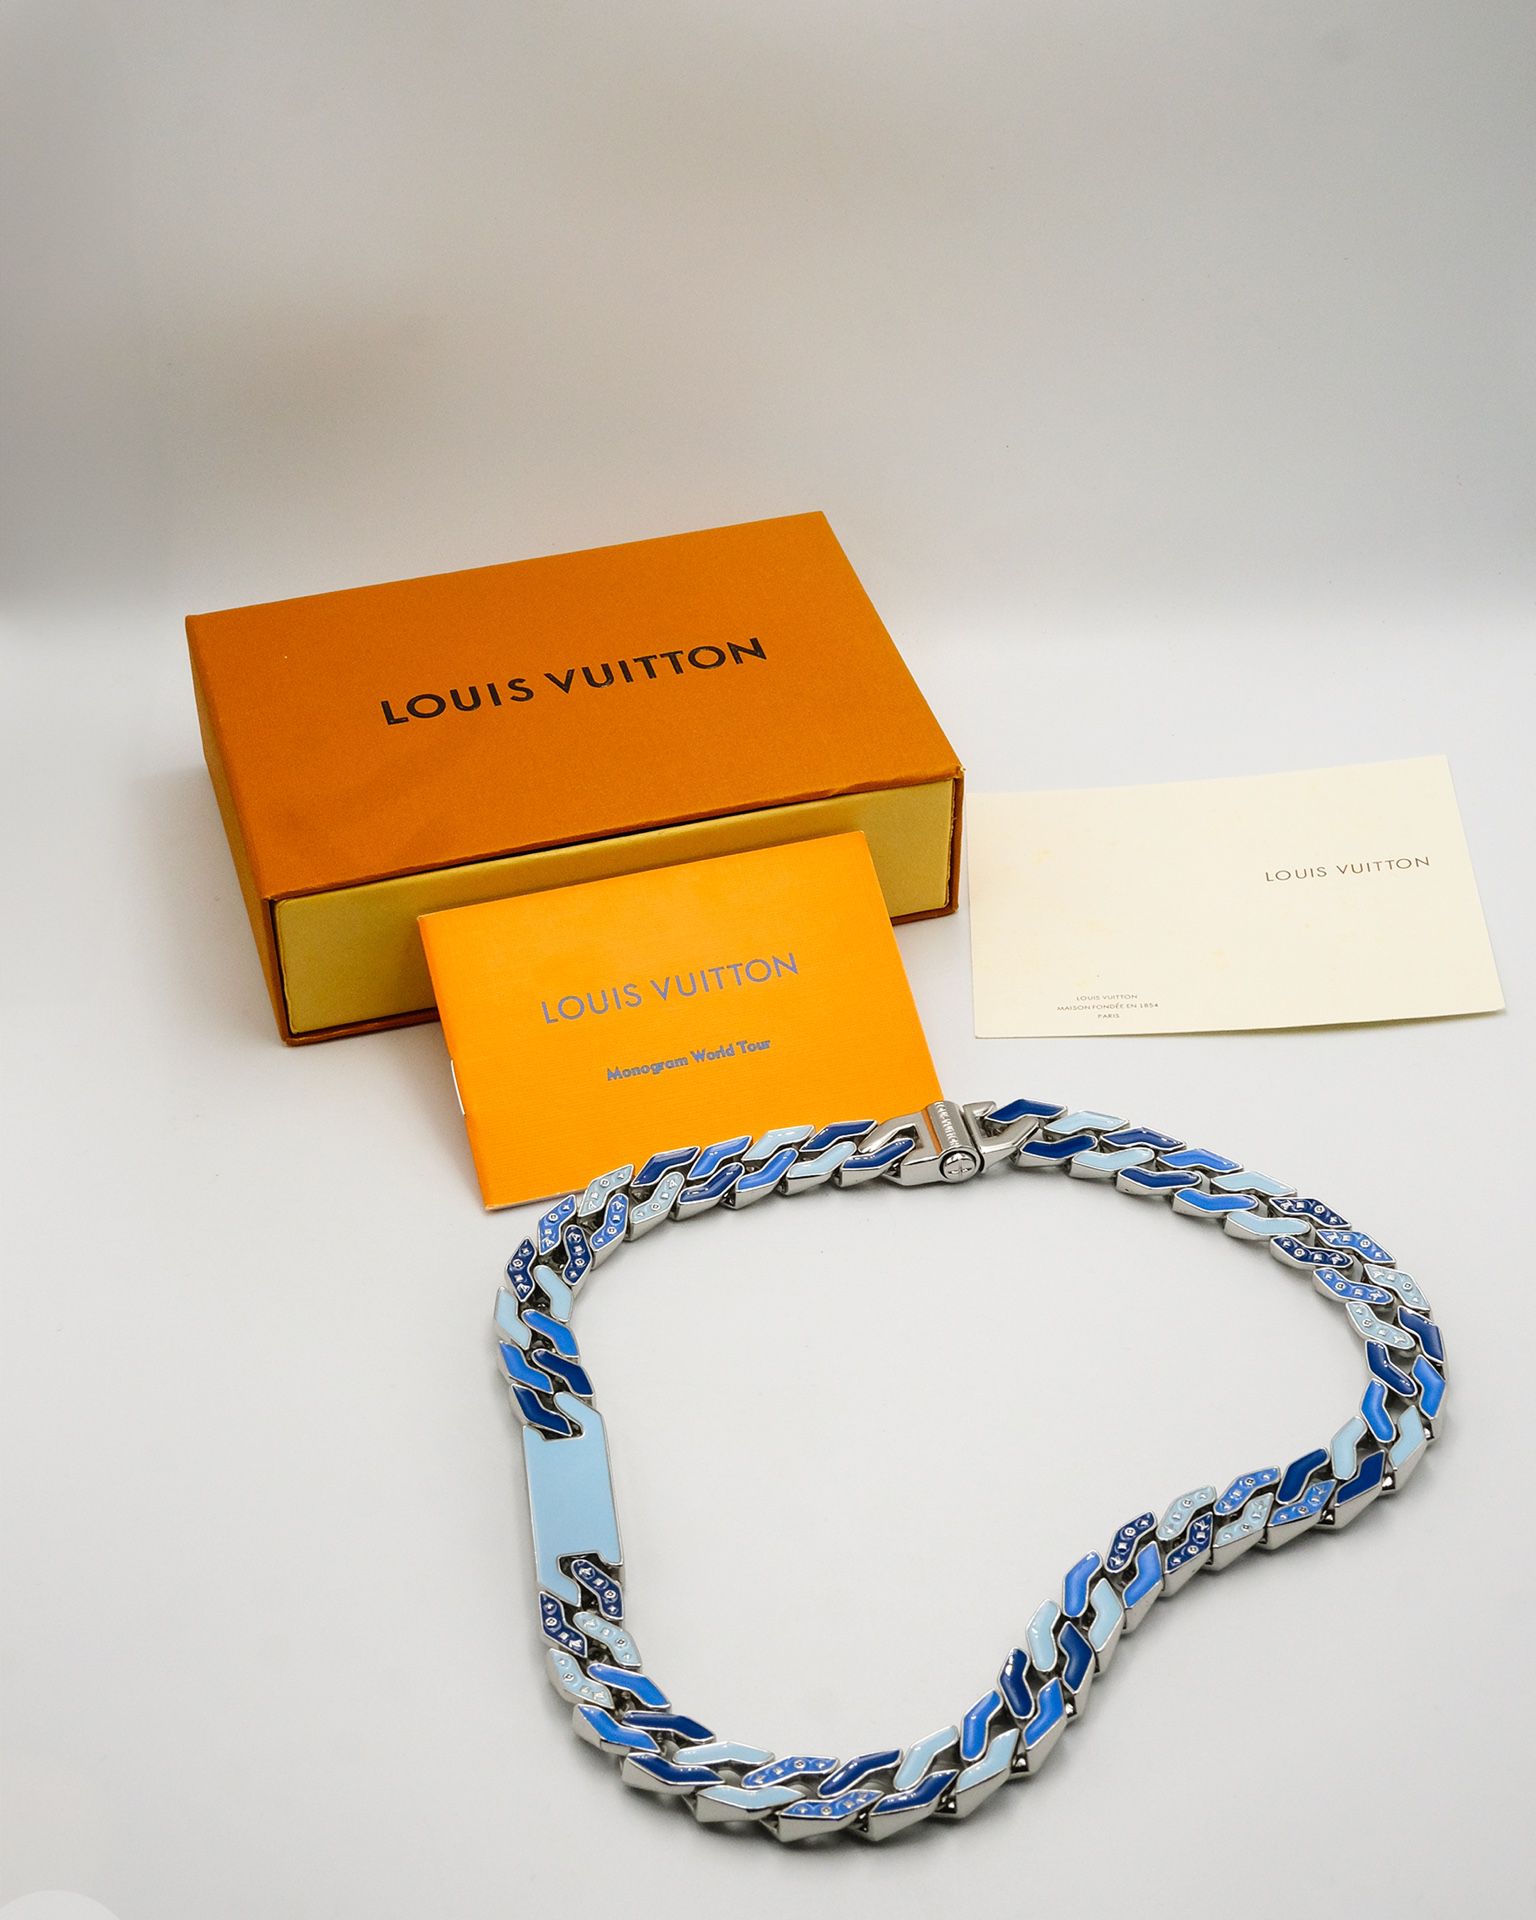 LV Jewelry Set for Sale in Fort Lauderdale, FL - OfferUp